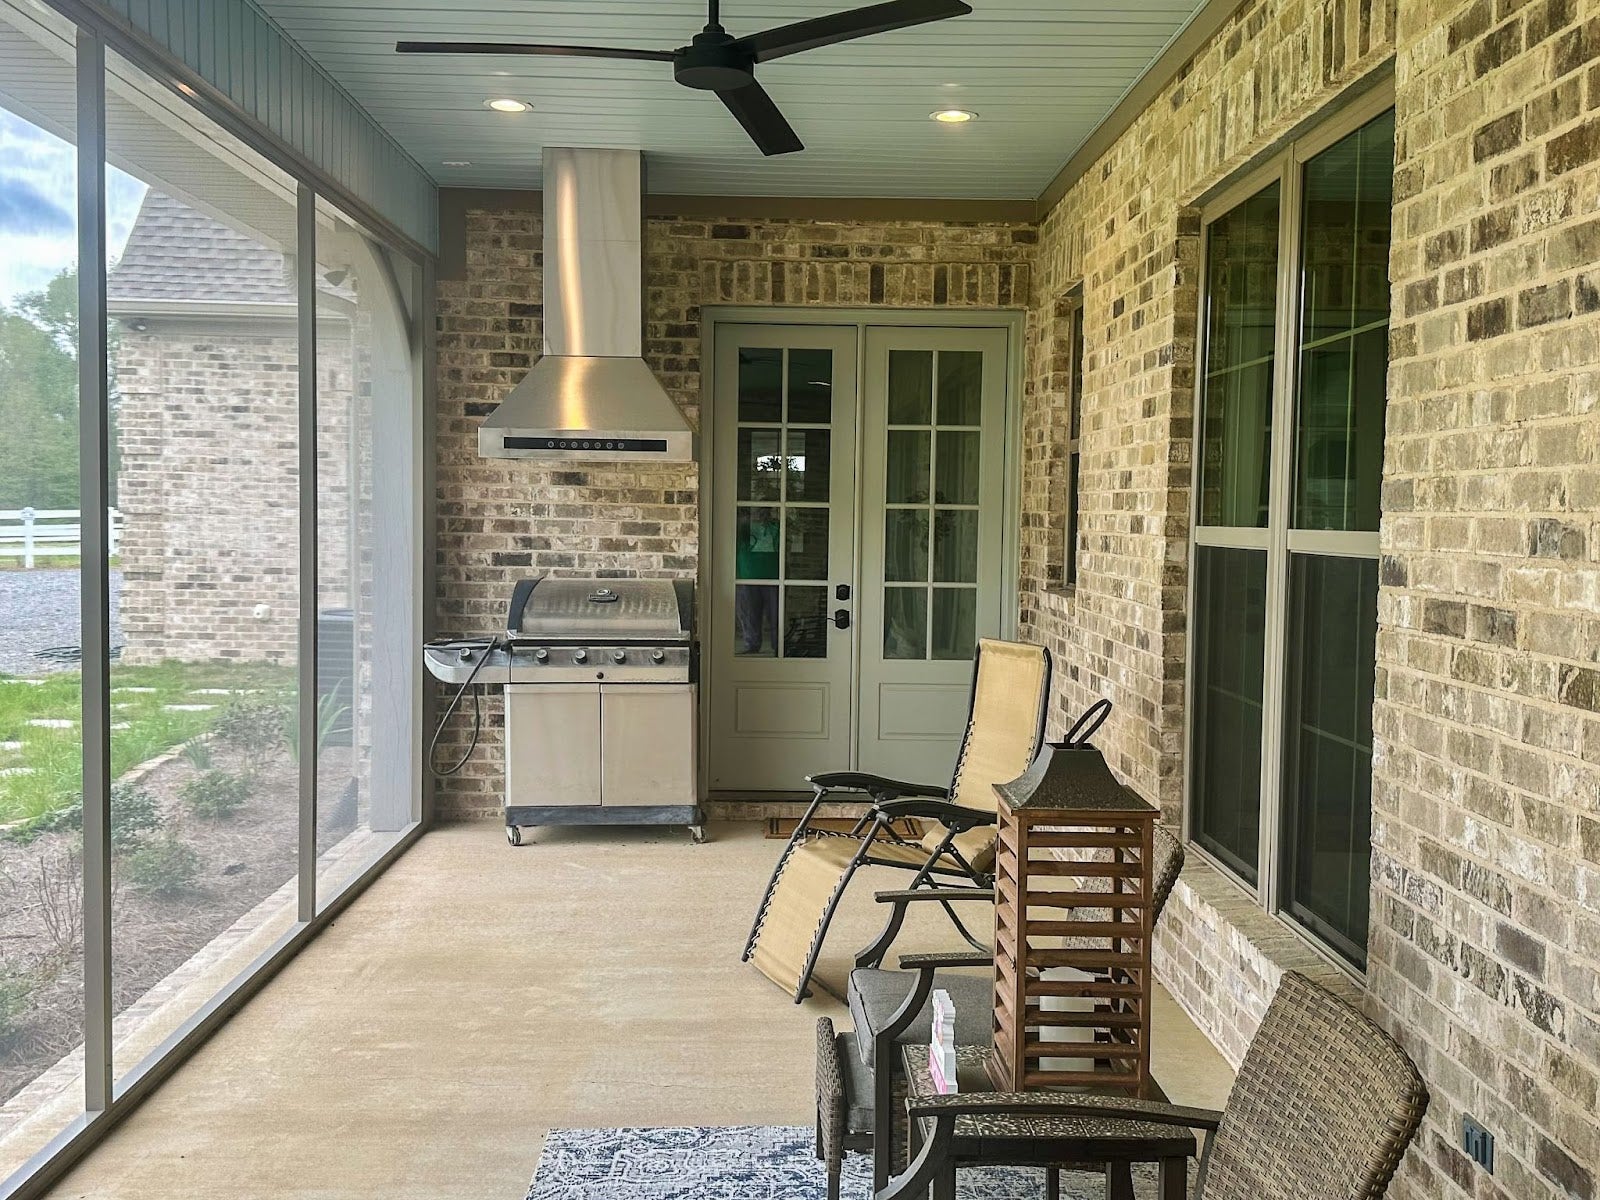 Covered patio with a stainless steel grill under a Proline wall range hood, surrounded by traditional brick walls and outdoor furniture - prolinerangehoods.com